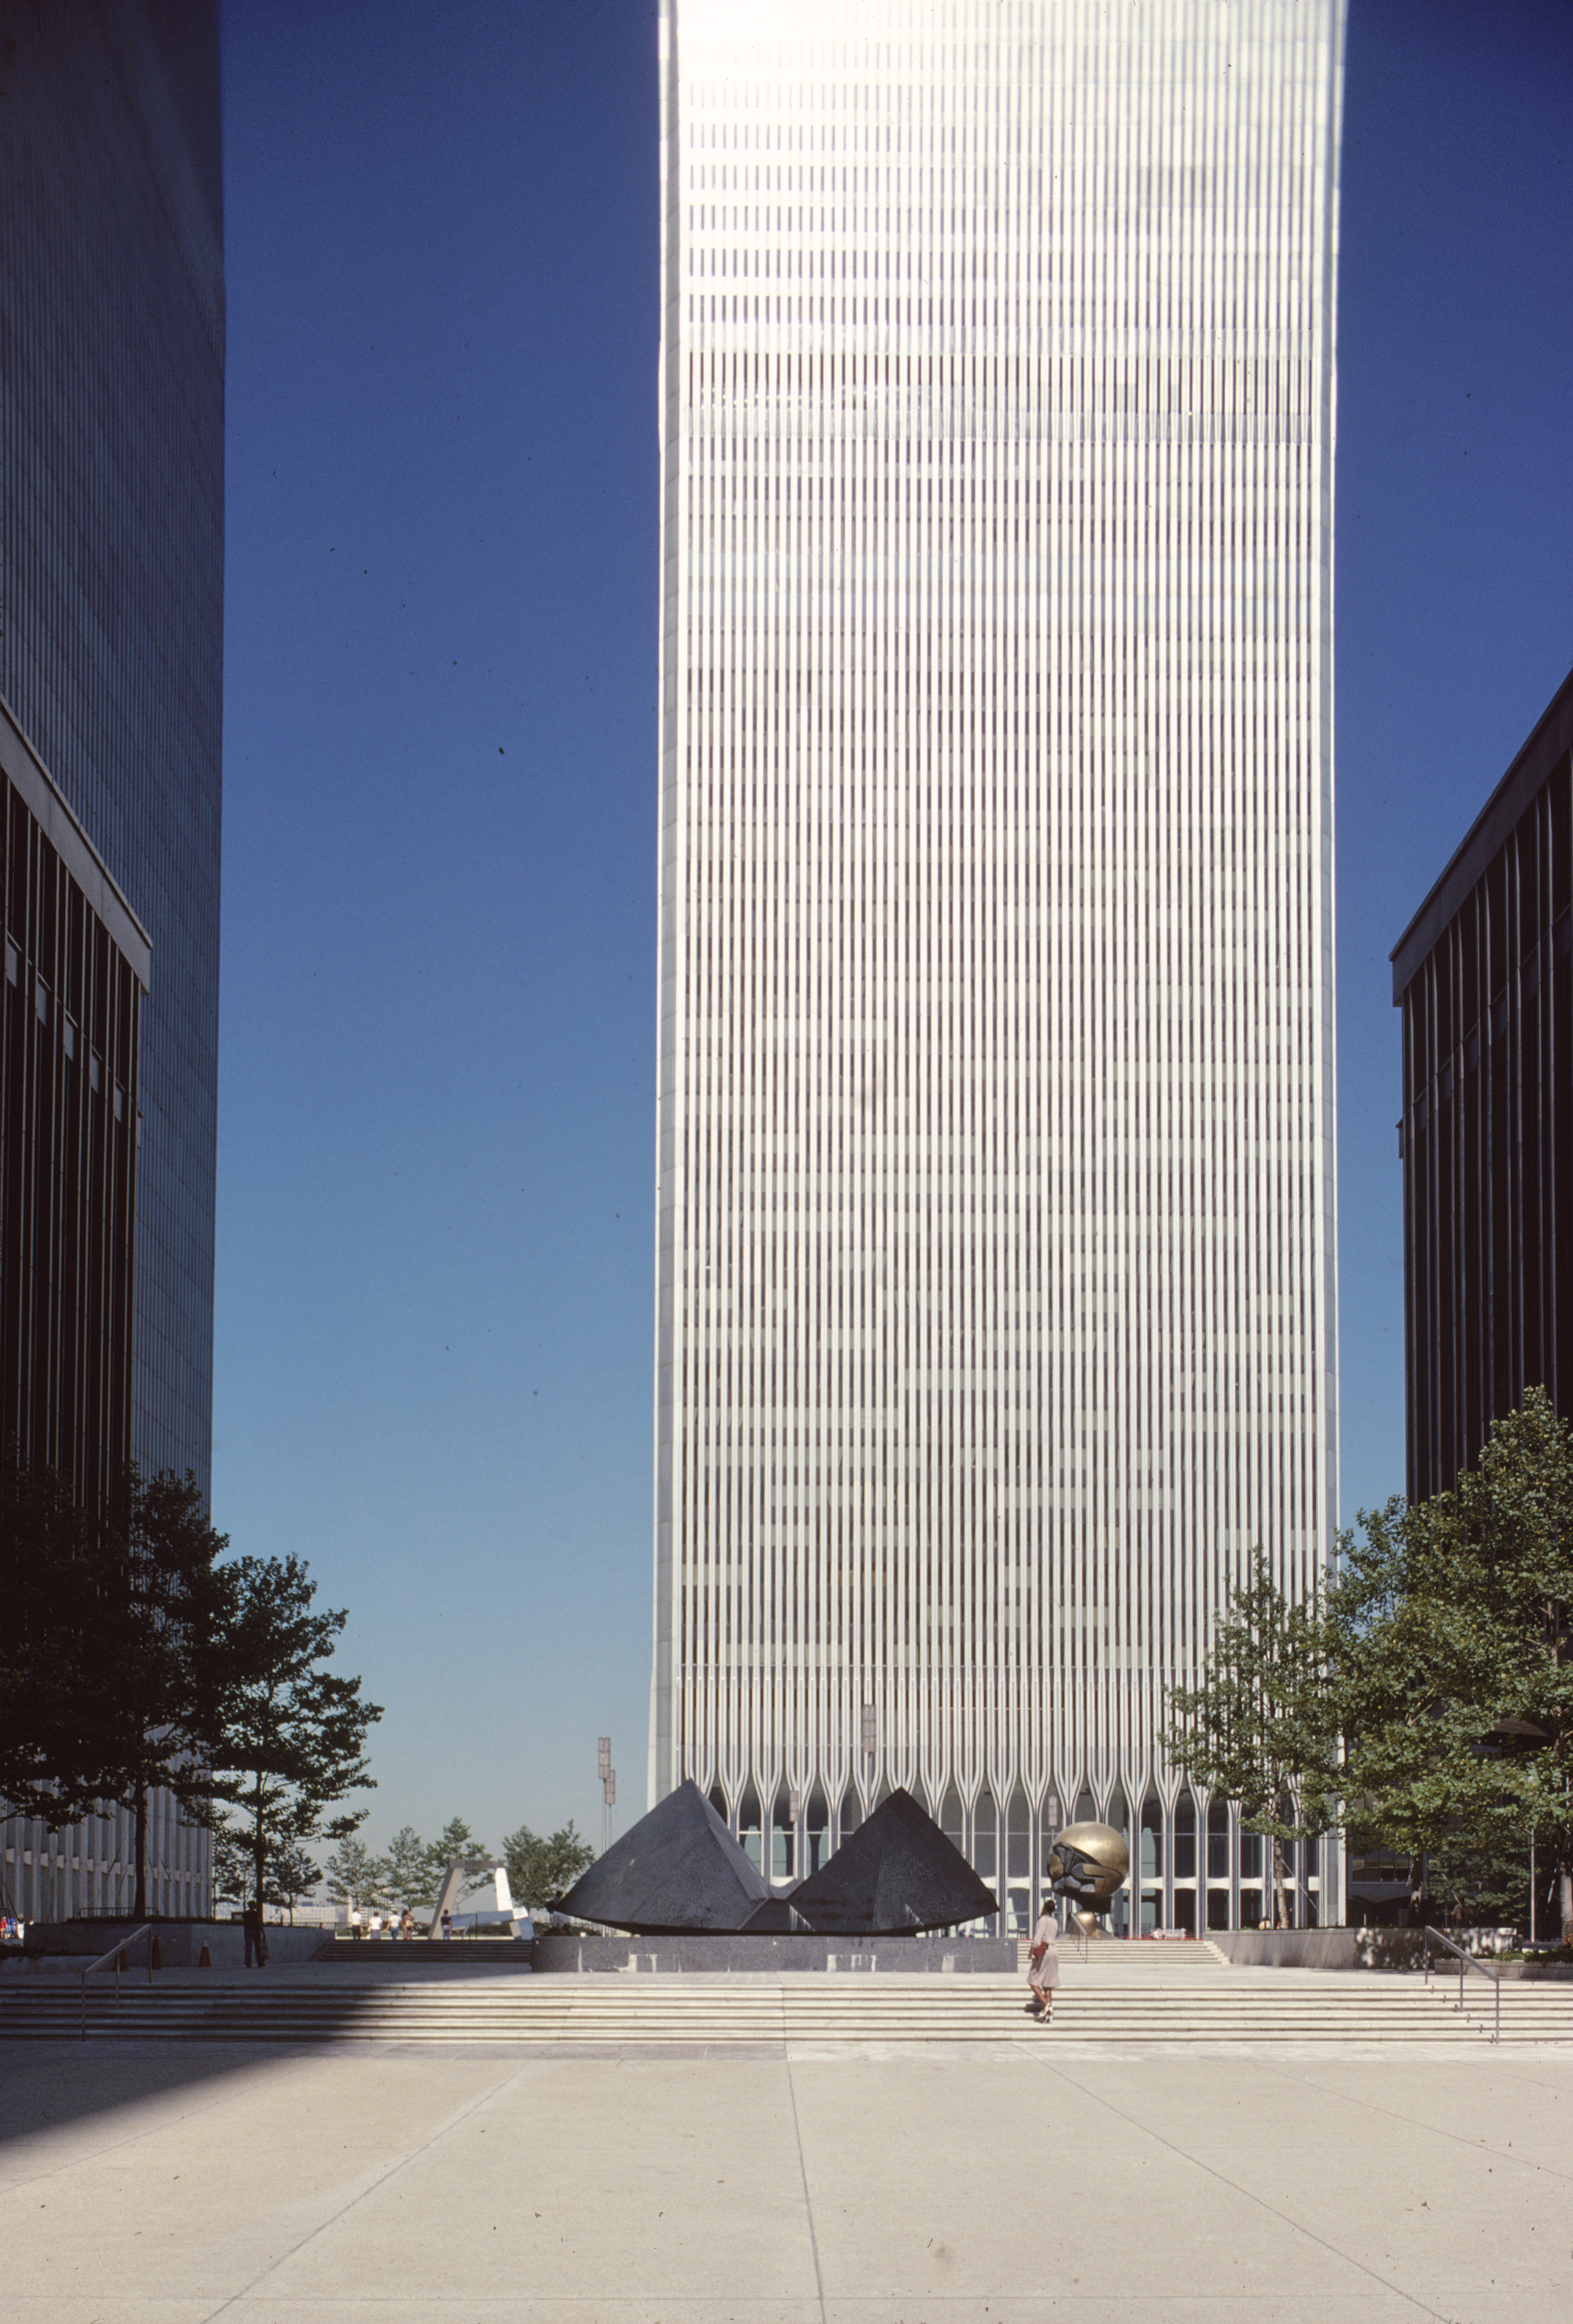 File:World Trade Center, New York. Exterior. Single tower with 